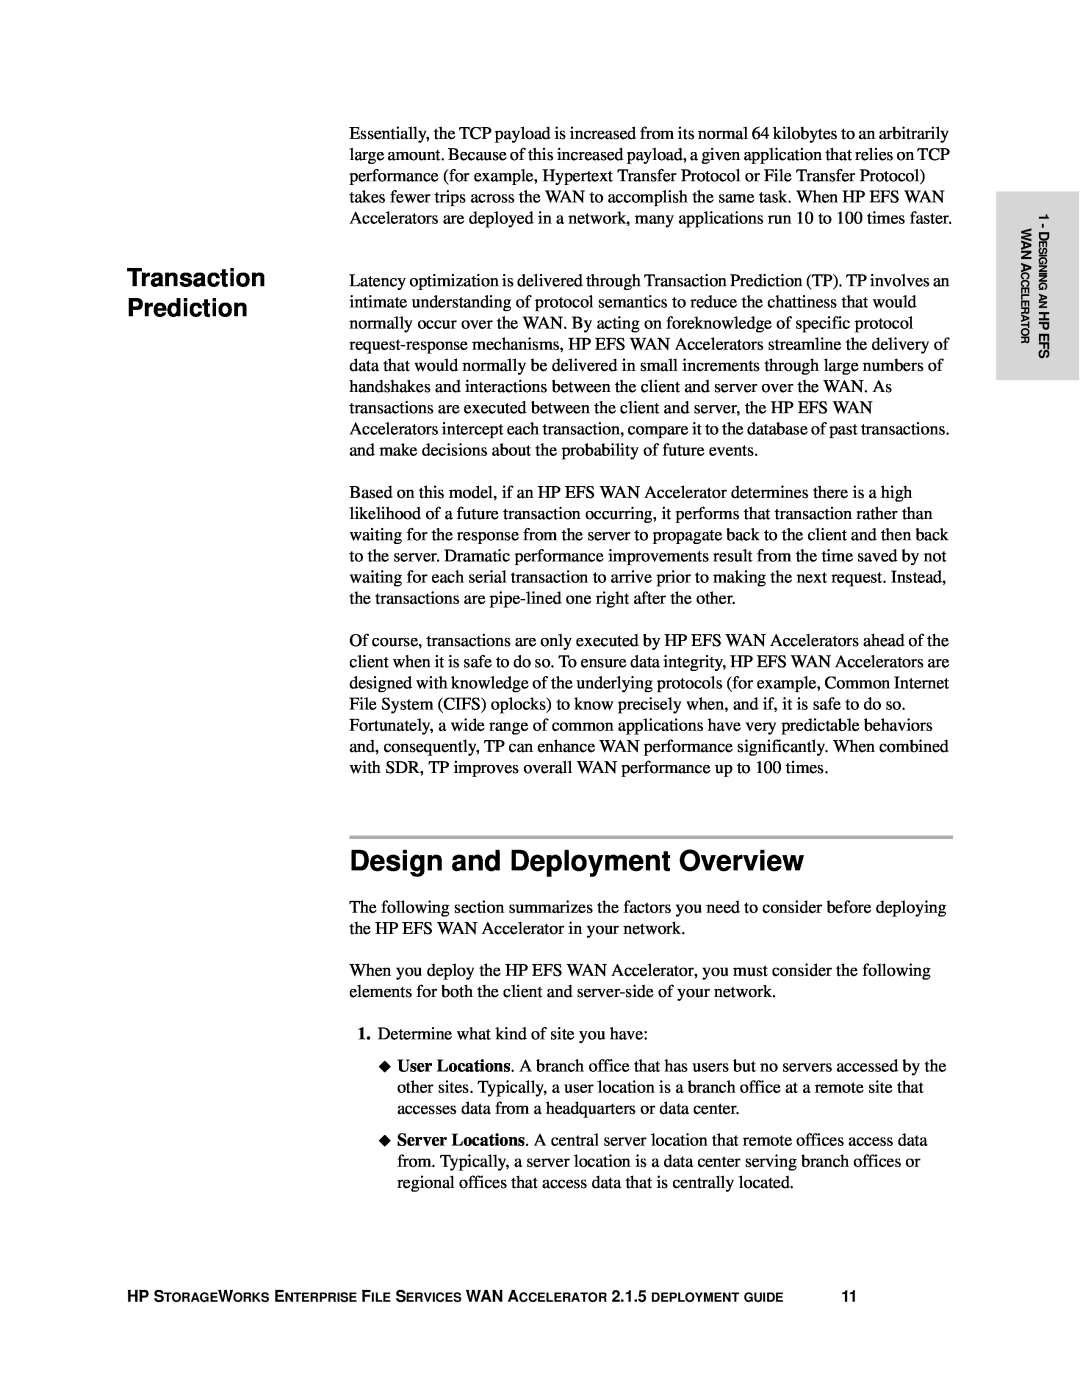 HP Enterprise File Services WAN Accelerator manual Design and Deployment Overview, Transaction Prediction 